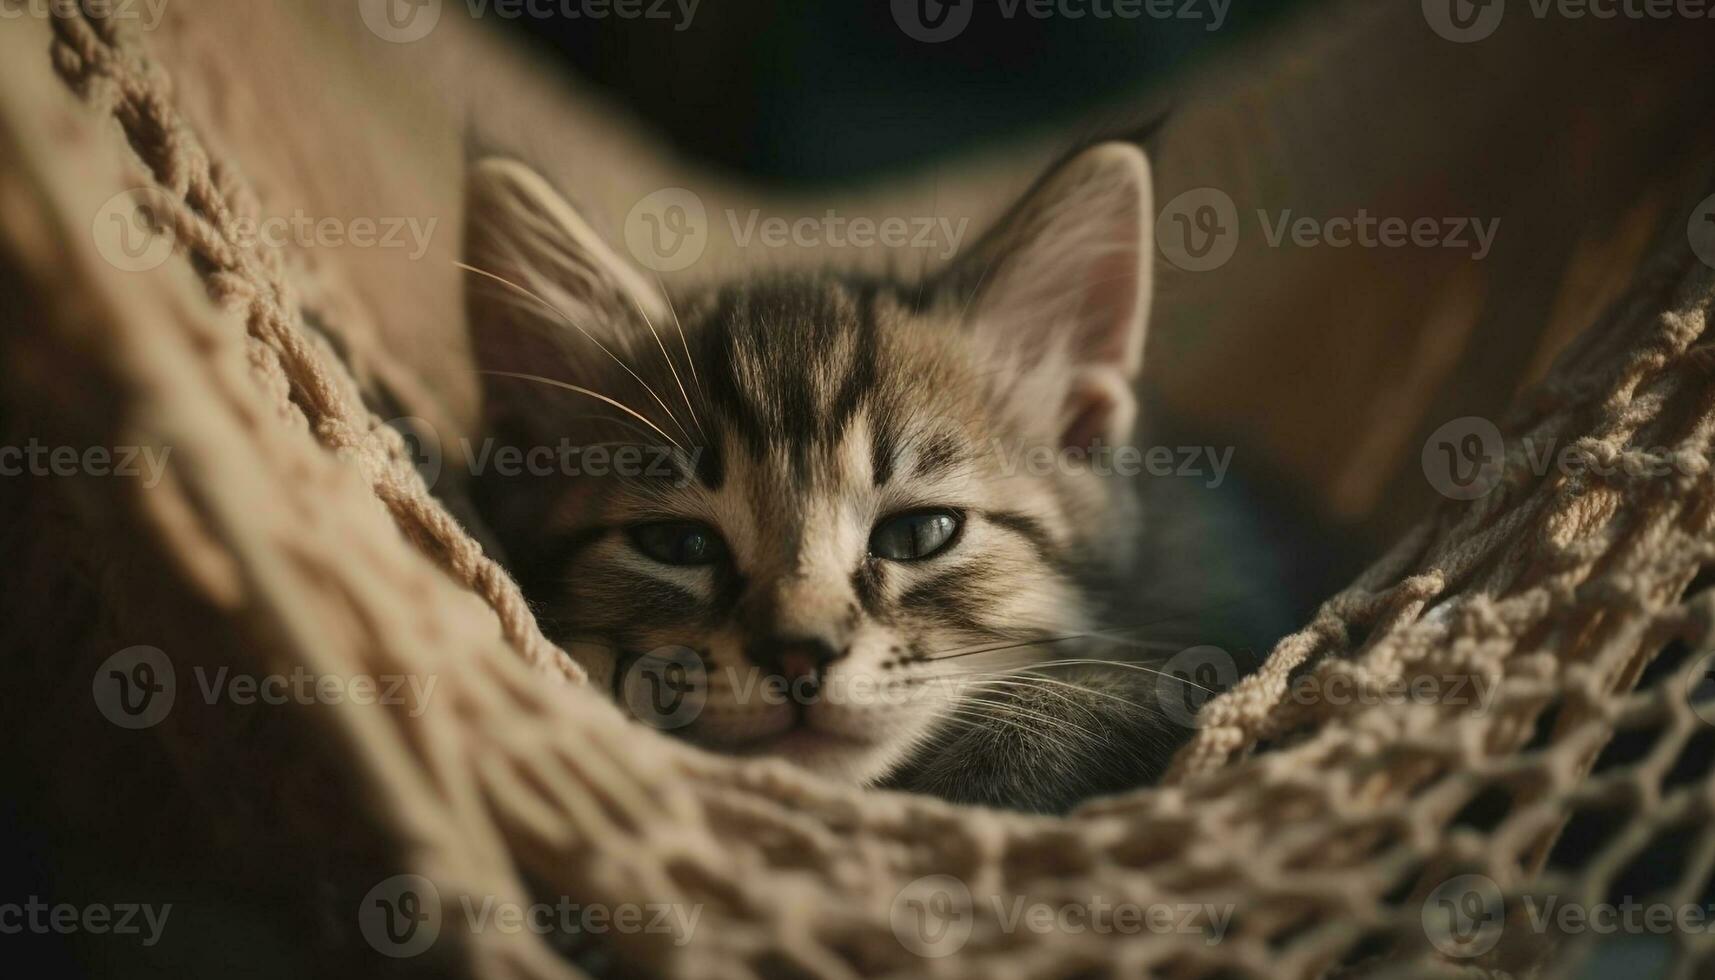 Cute kitten with striped fur and yellow eyes staring playfully generated by AI photo